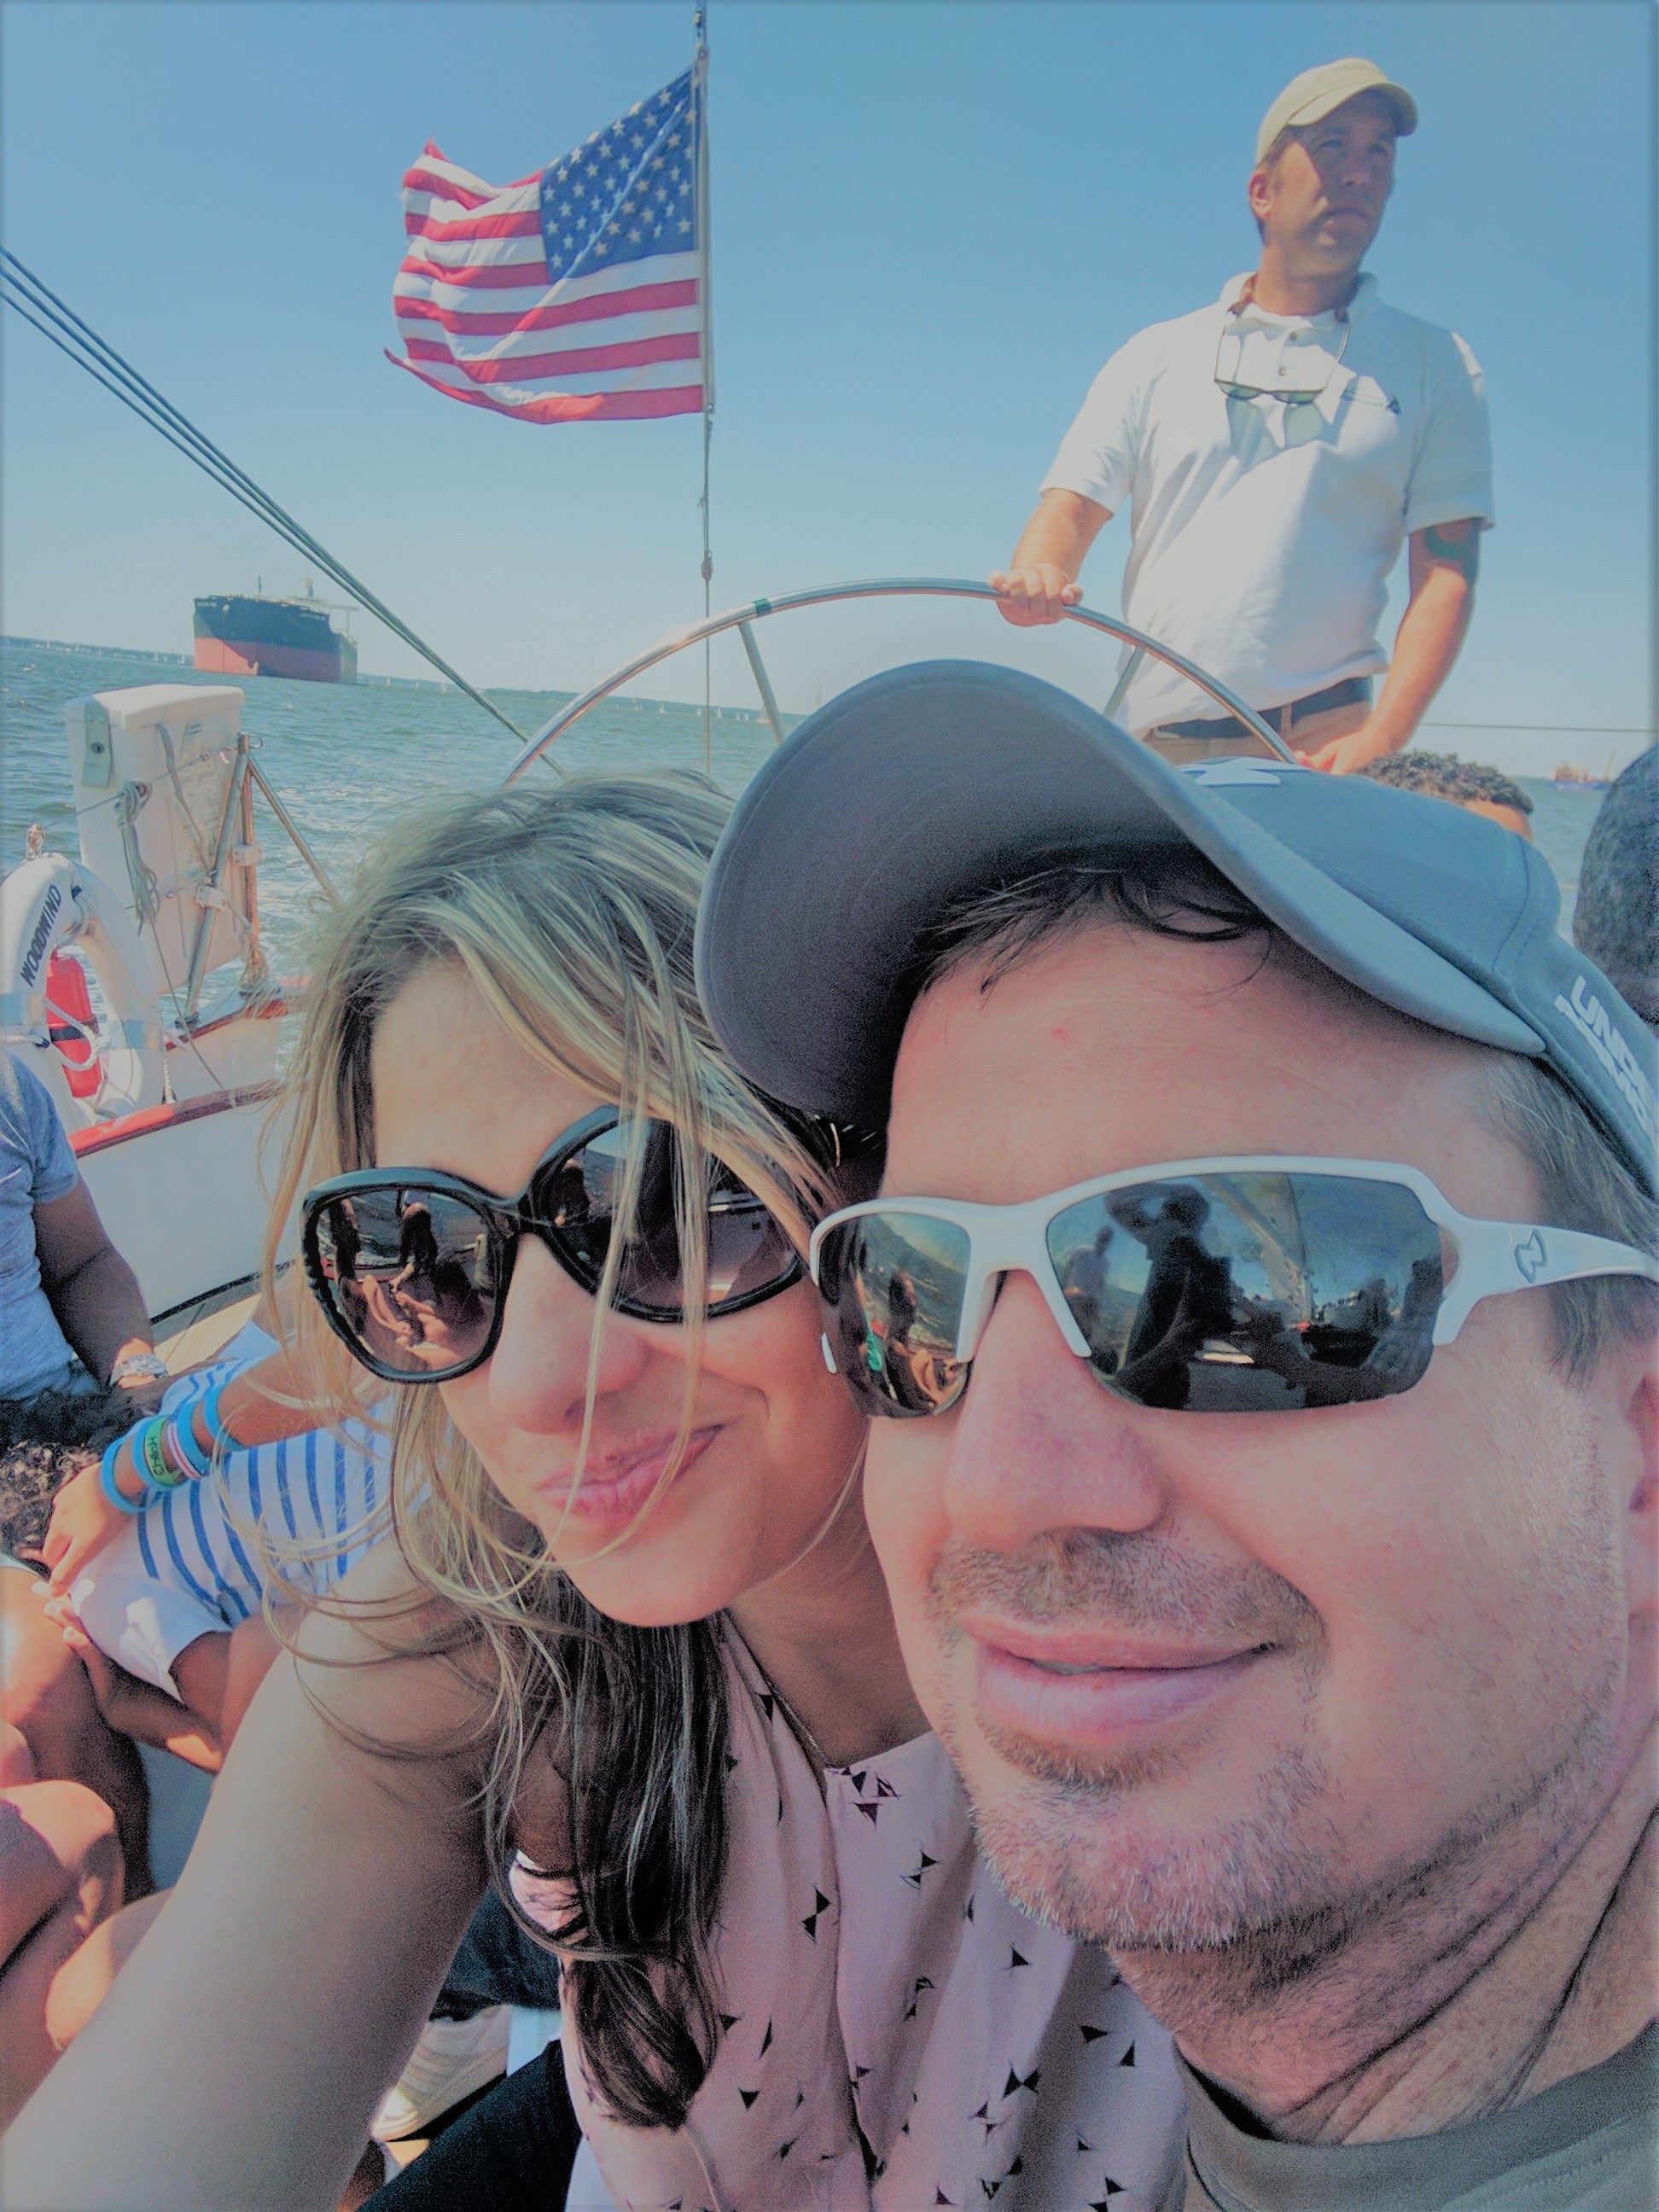 Couple smiling while captain sailing the boat in background